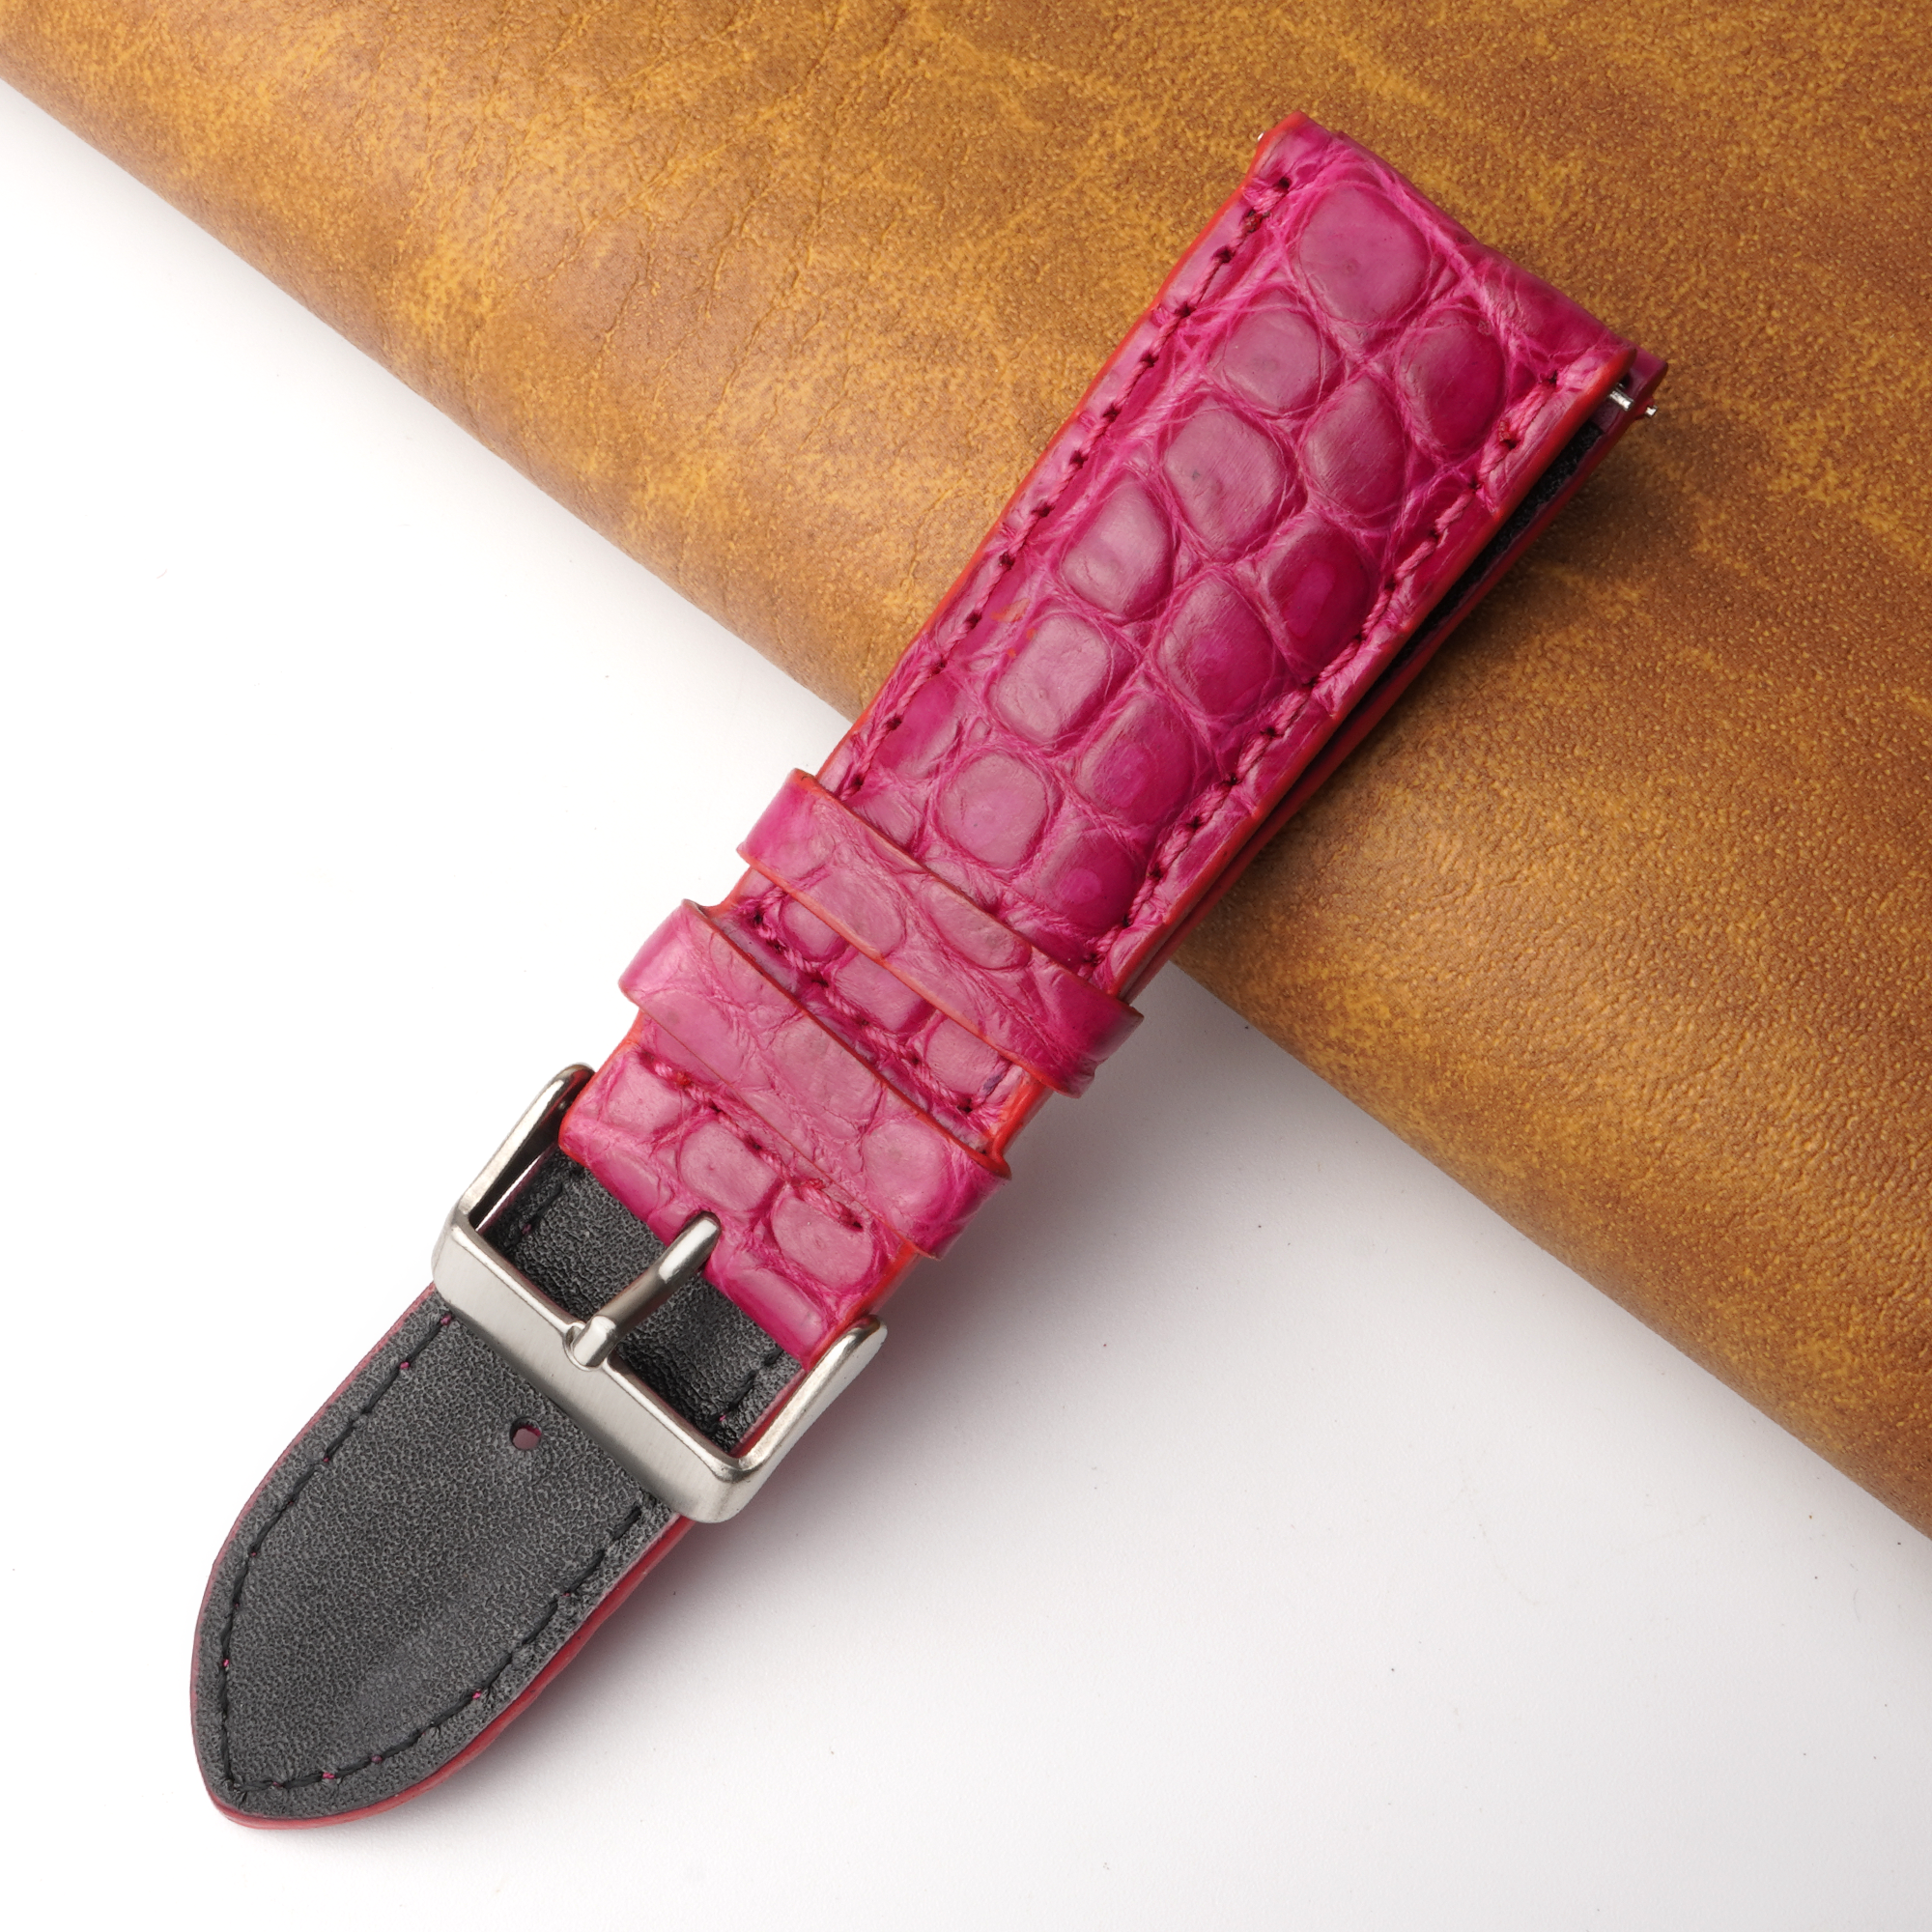 24mm Pink Unique Pattern Alligator Leather Watch Band For Men DH-225I